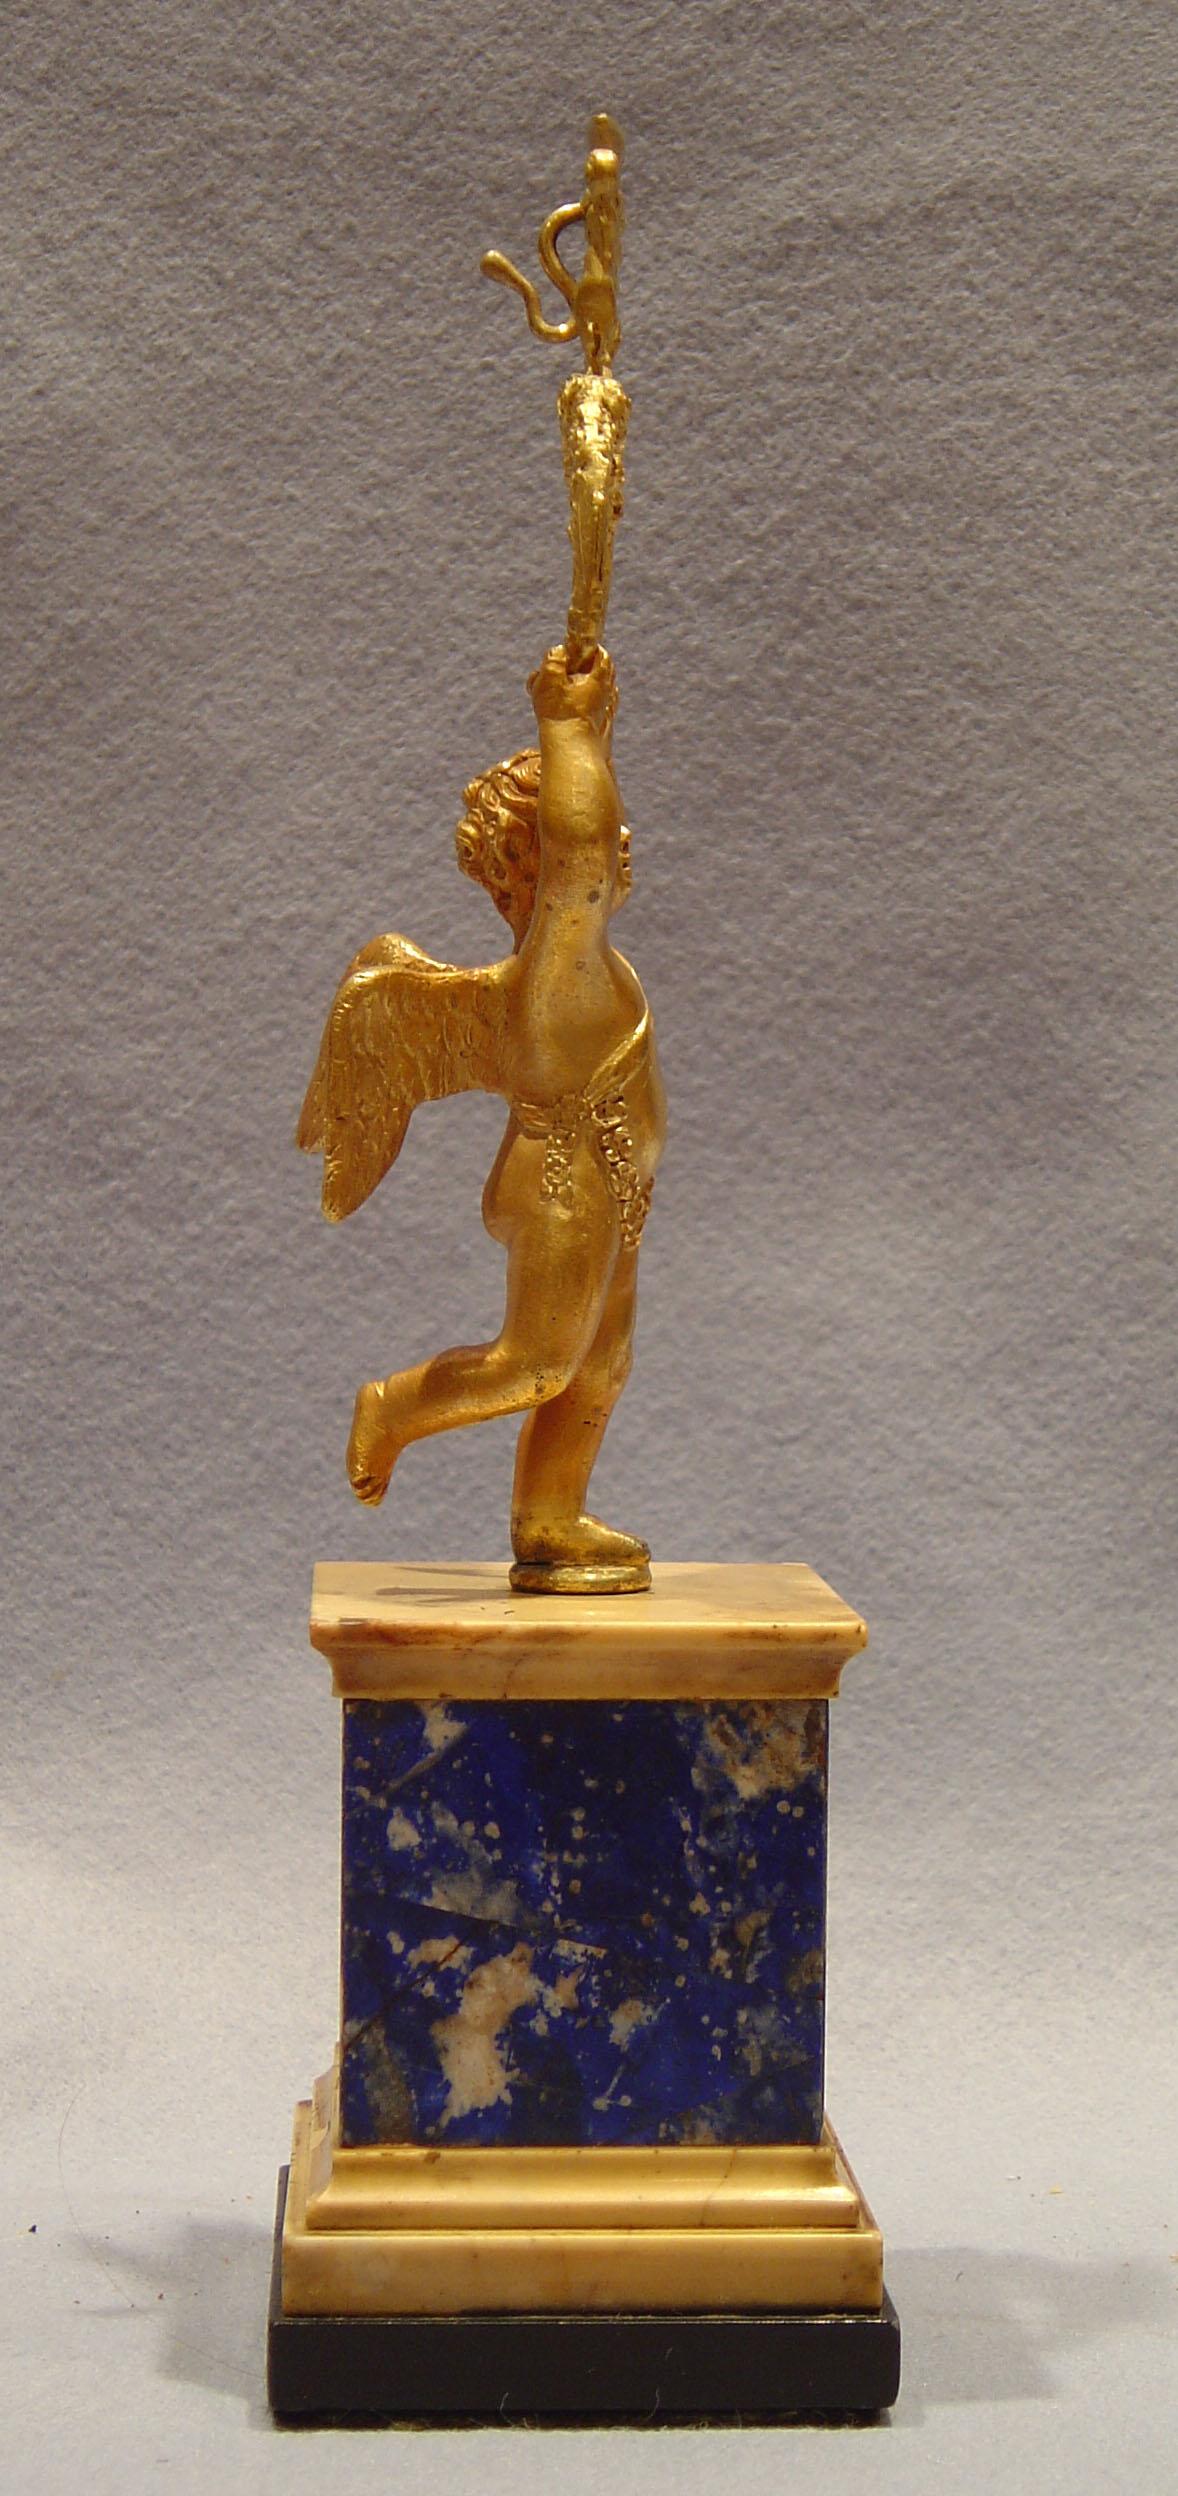 Superb near pair of Russian or English early 19th century watch or portrait holders. In the finest quality ormolu set on square socles. The bases of square form in black and Sienna marble set with lapis lazuli. The figure is of a winged cupid with